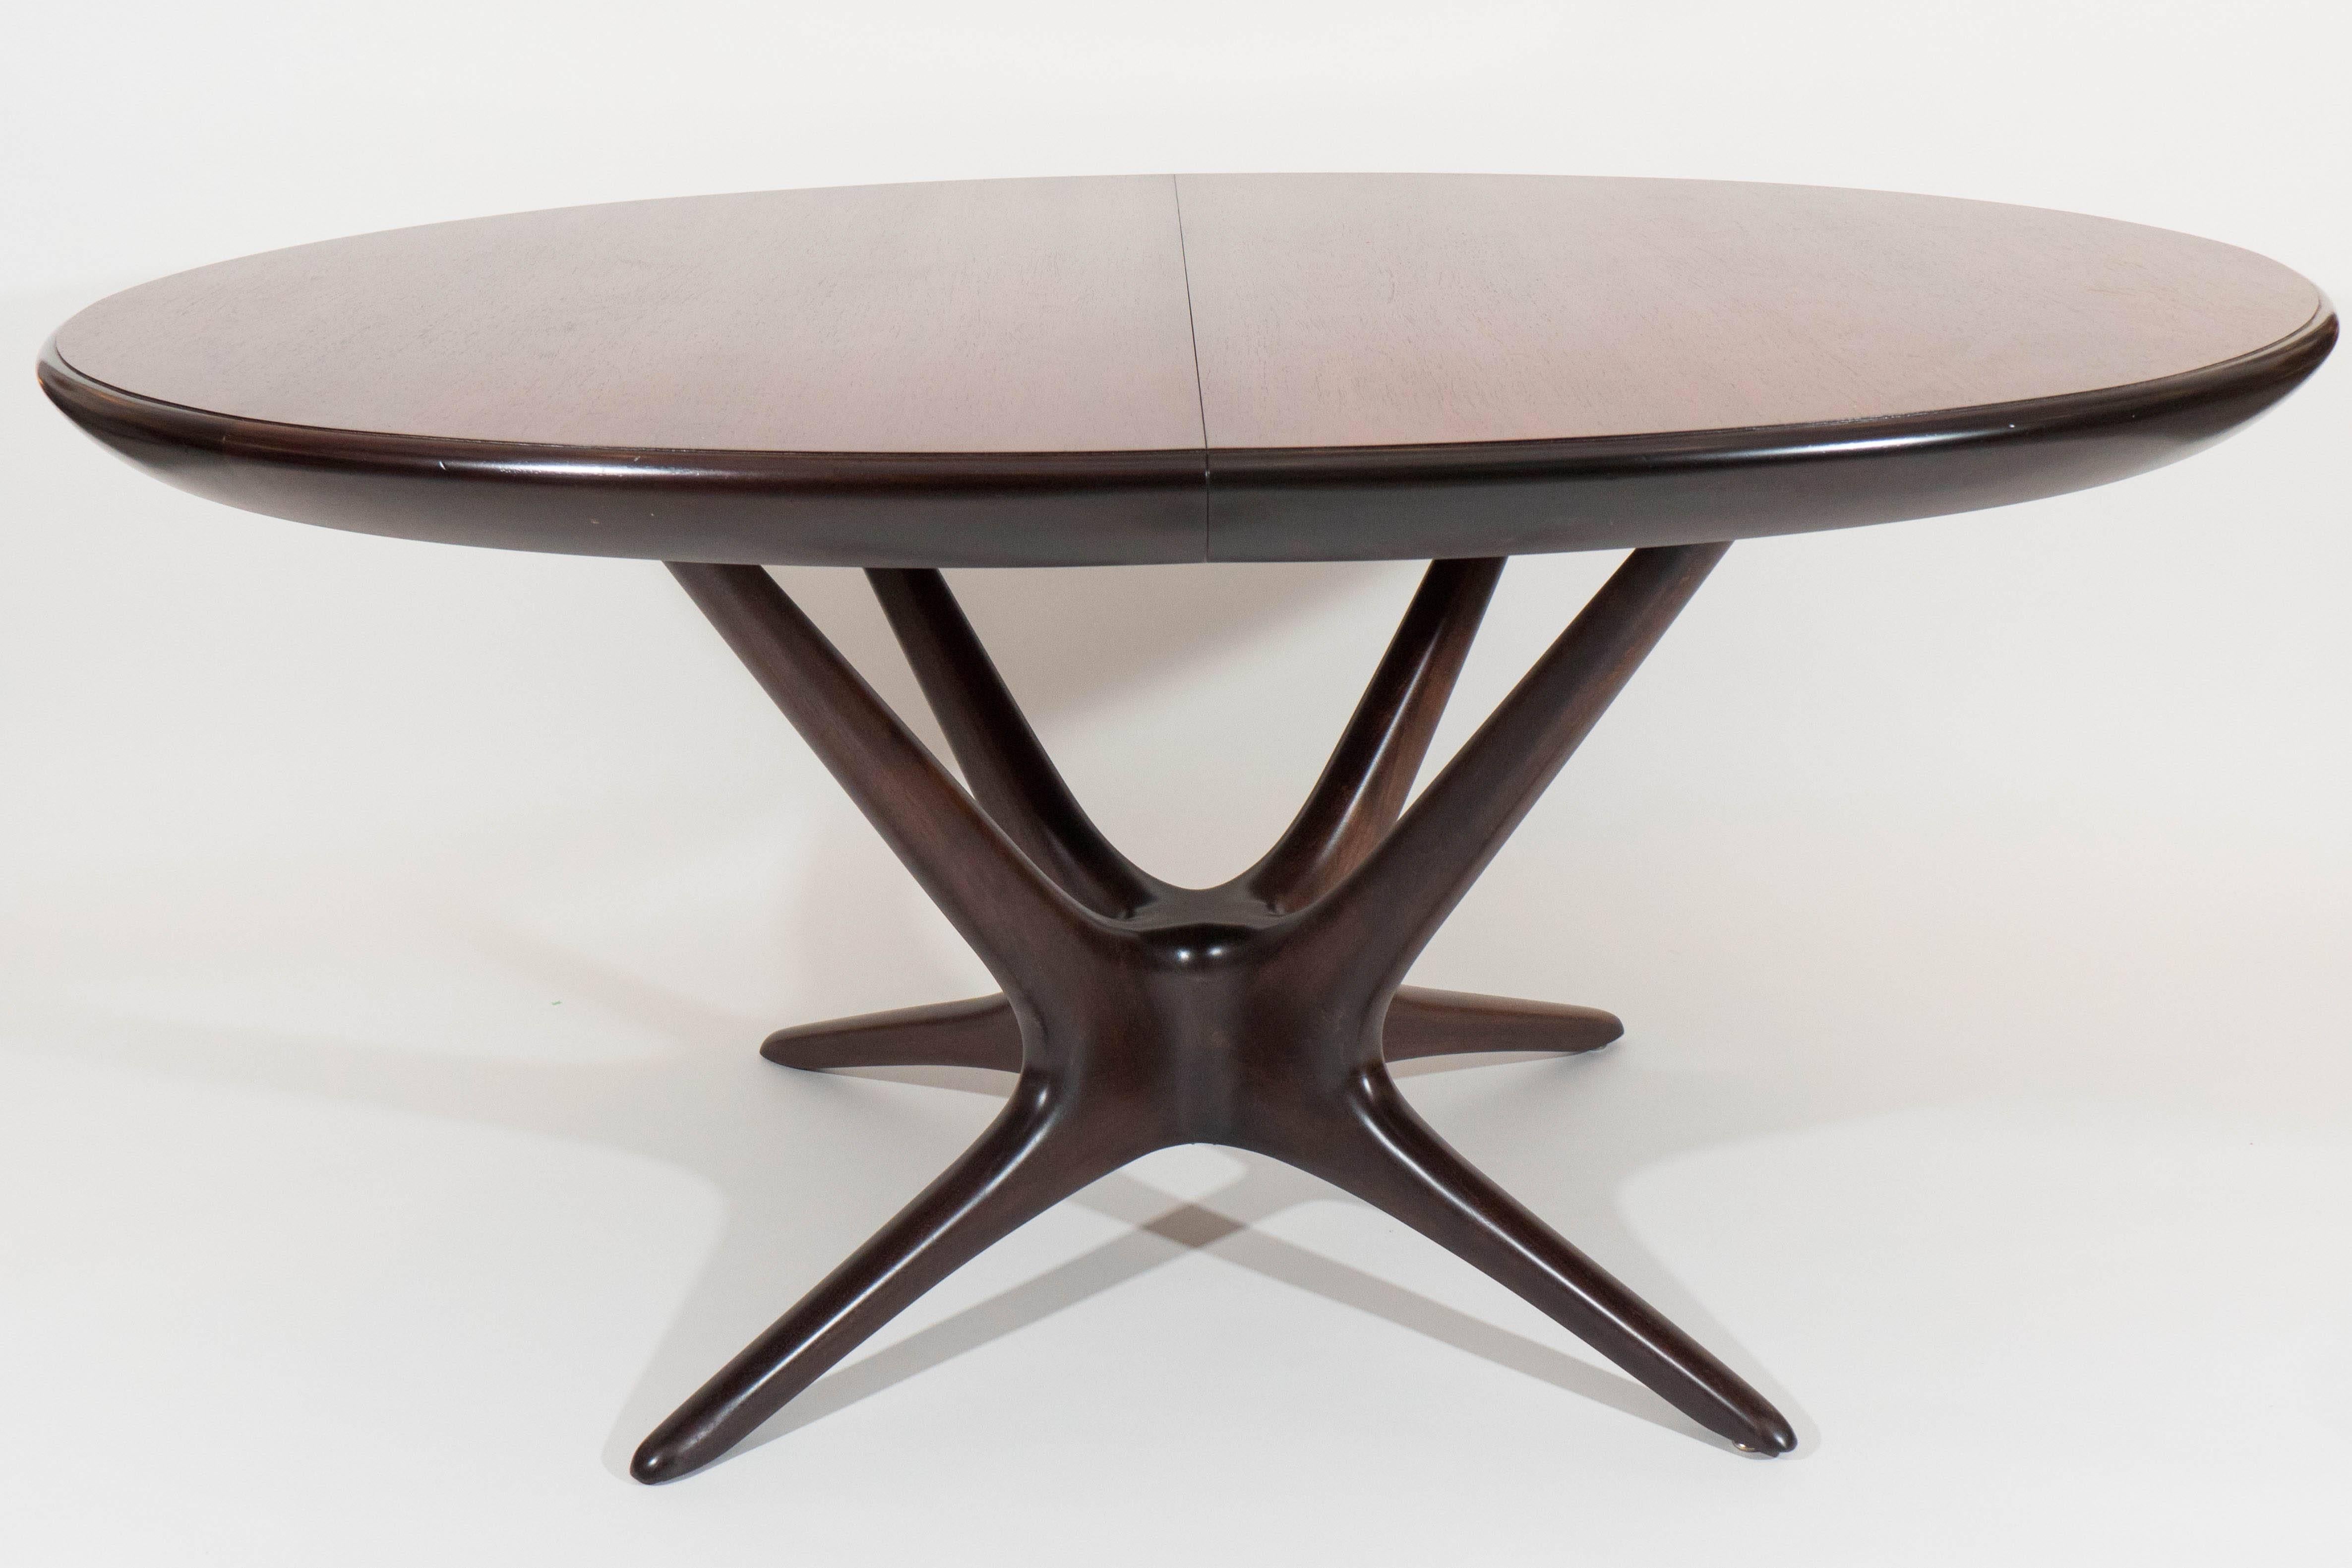 Designed by Vladimir Kagan for Kagan-Dreyfuss, this table is rare for it's size but possesses the signature organic form that has made Kagan an icon of Mid-Century design. The indicated measurements do not include the two signed leaves that extend